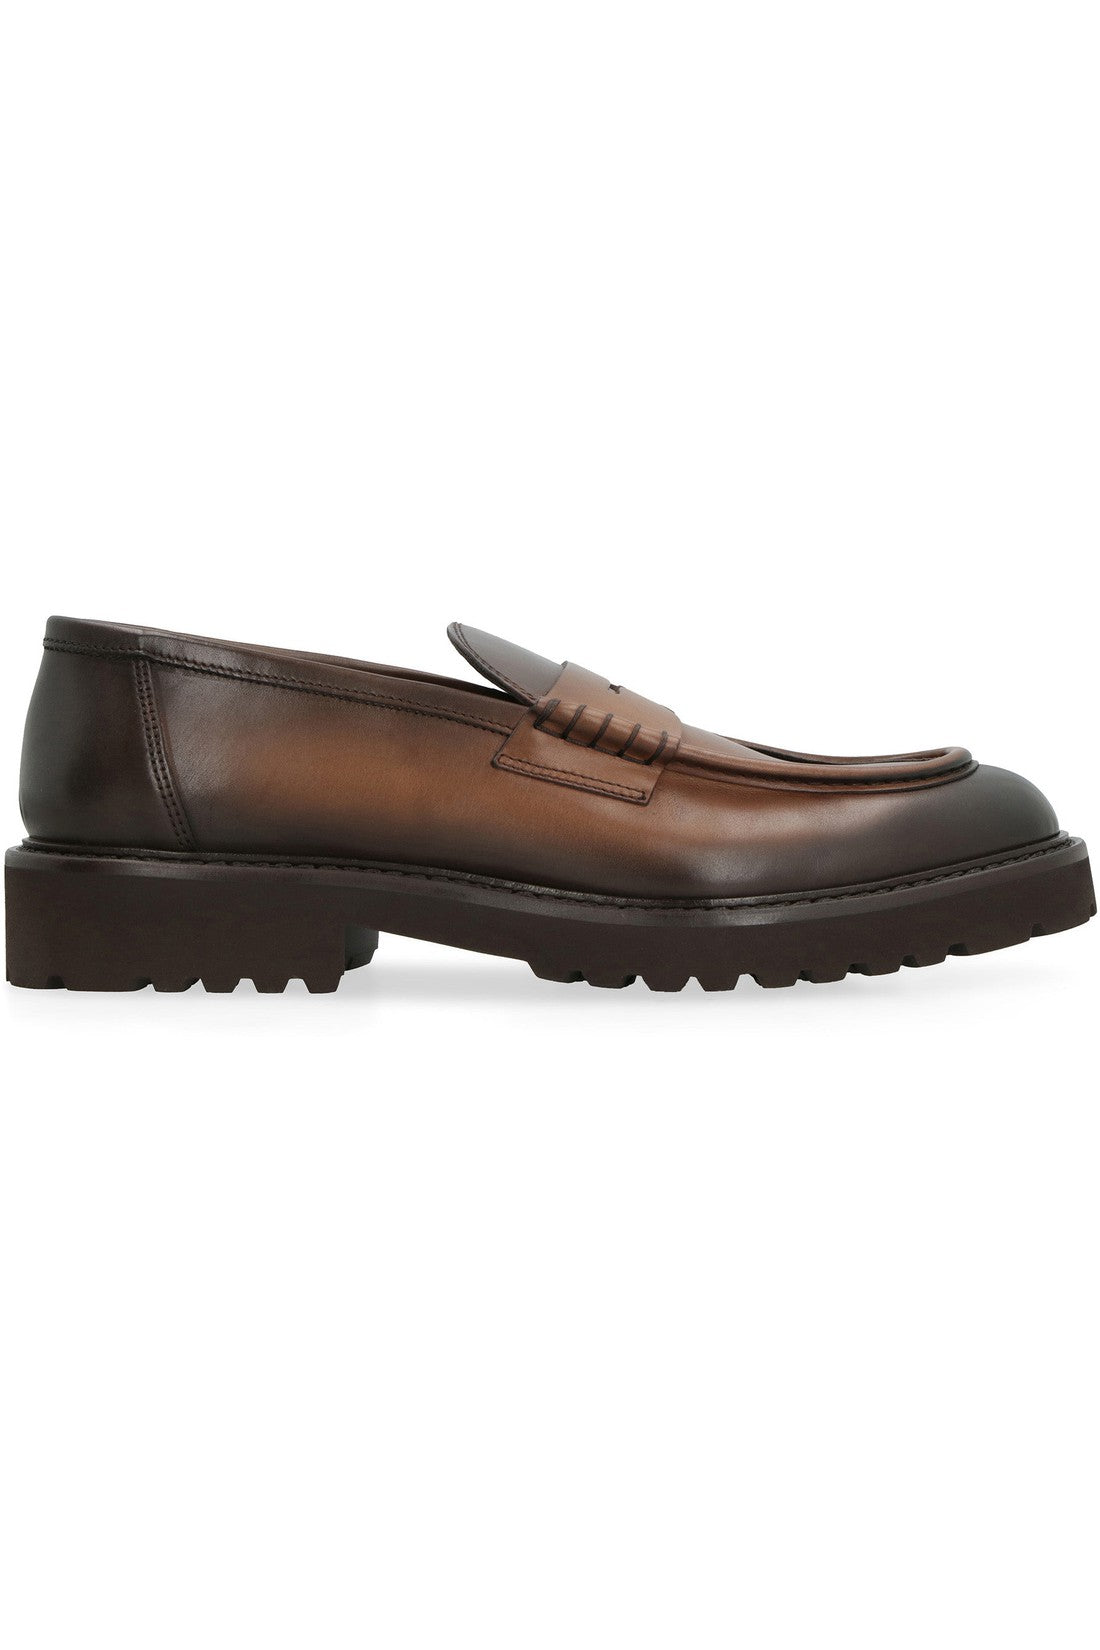 Doucal's-OUTLET-SALE-Leather loafers-ARCHIVIST